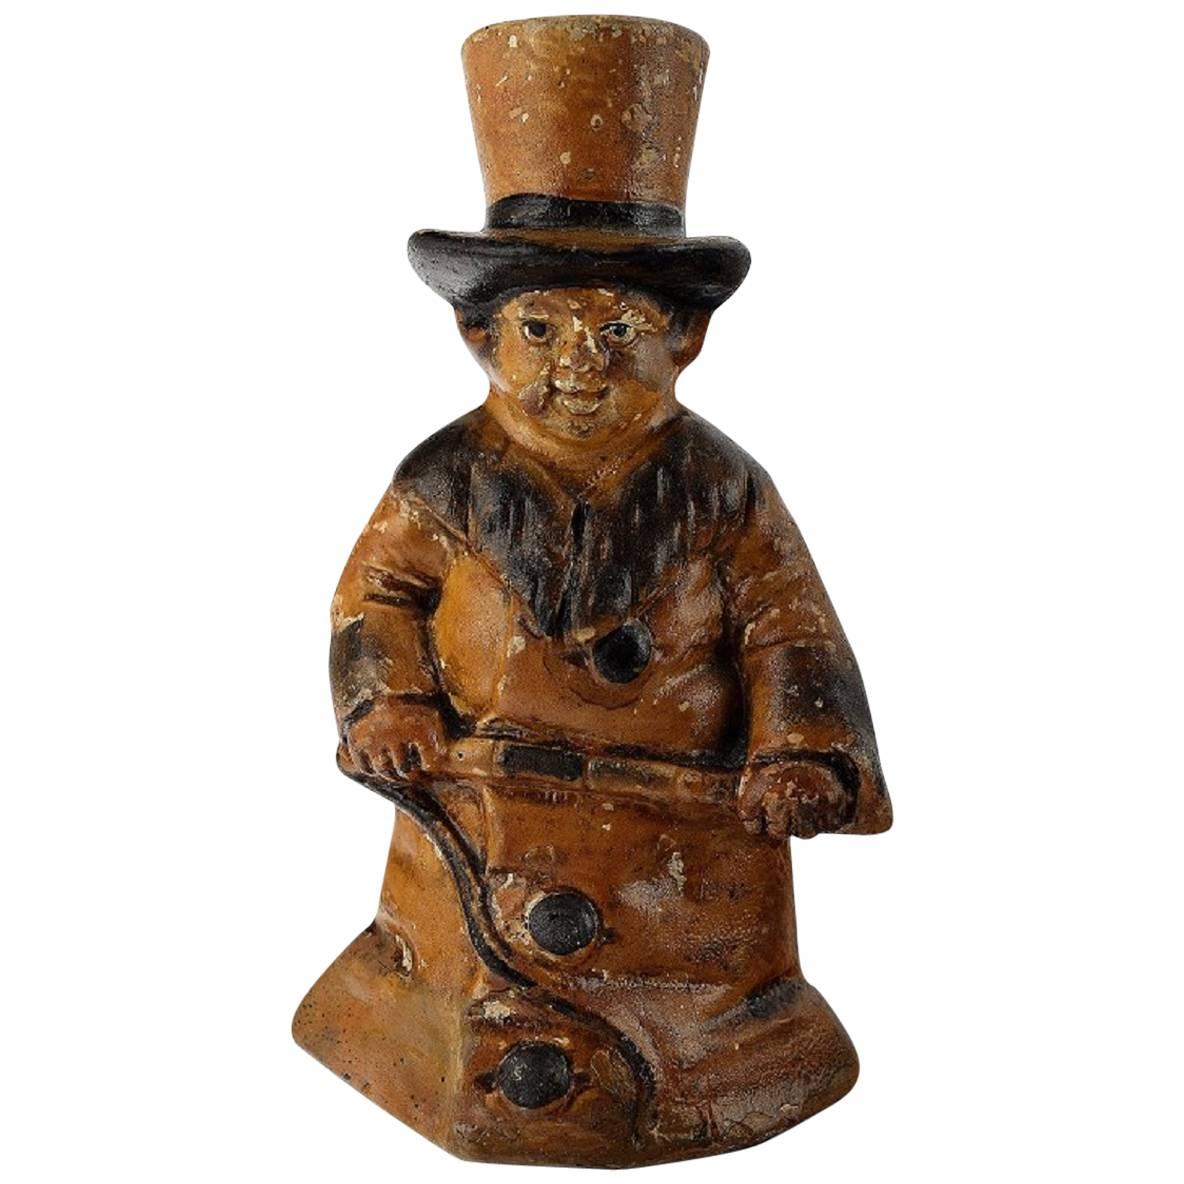 English Figure in Stoneware After Charles Dickens "Oliver Twist, " 1870s